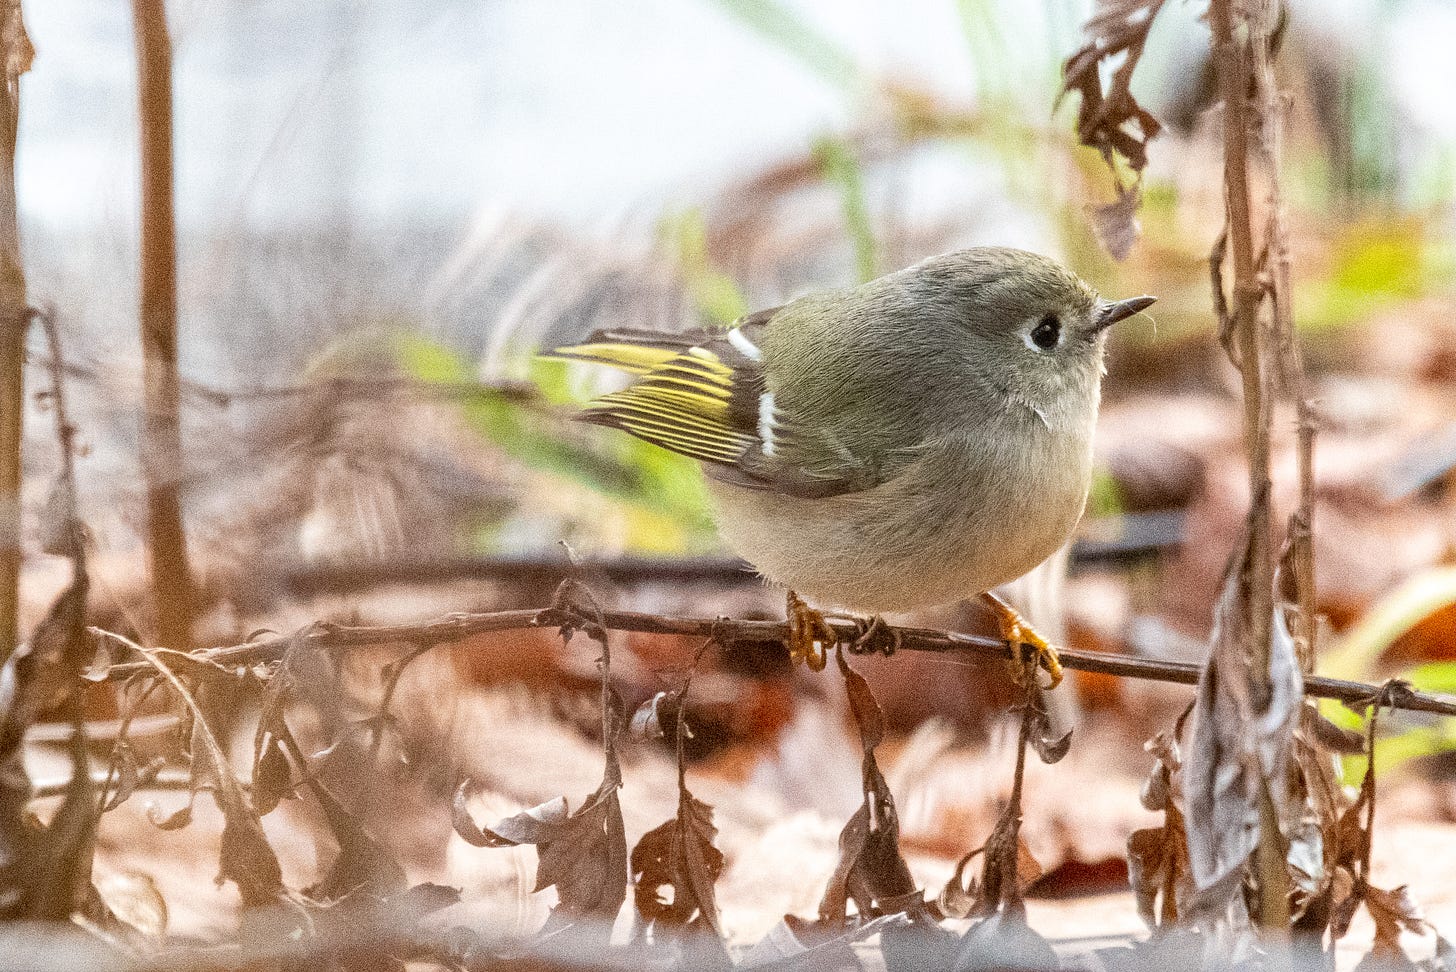 Ruby-crowned kinglet, in close up, perched on a dried plant, looking off to its left